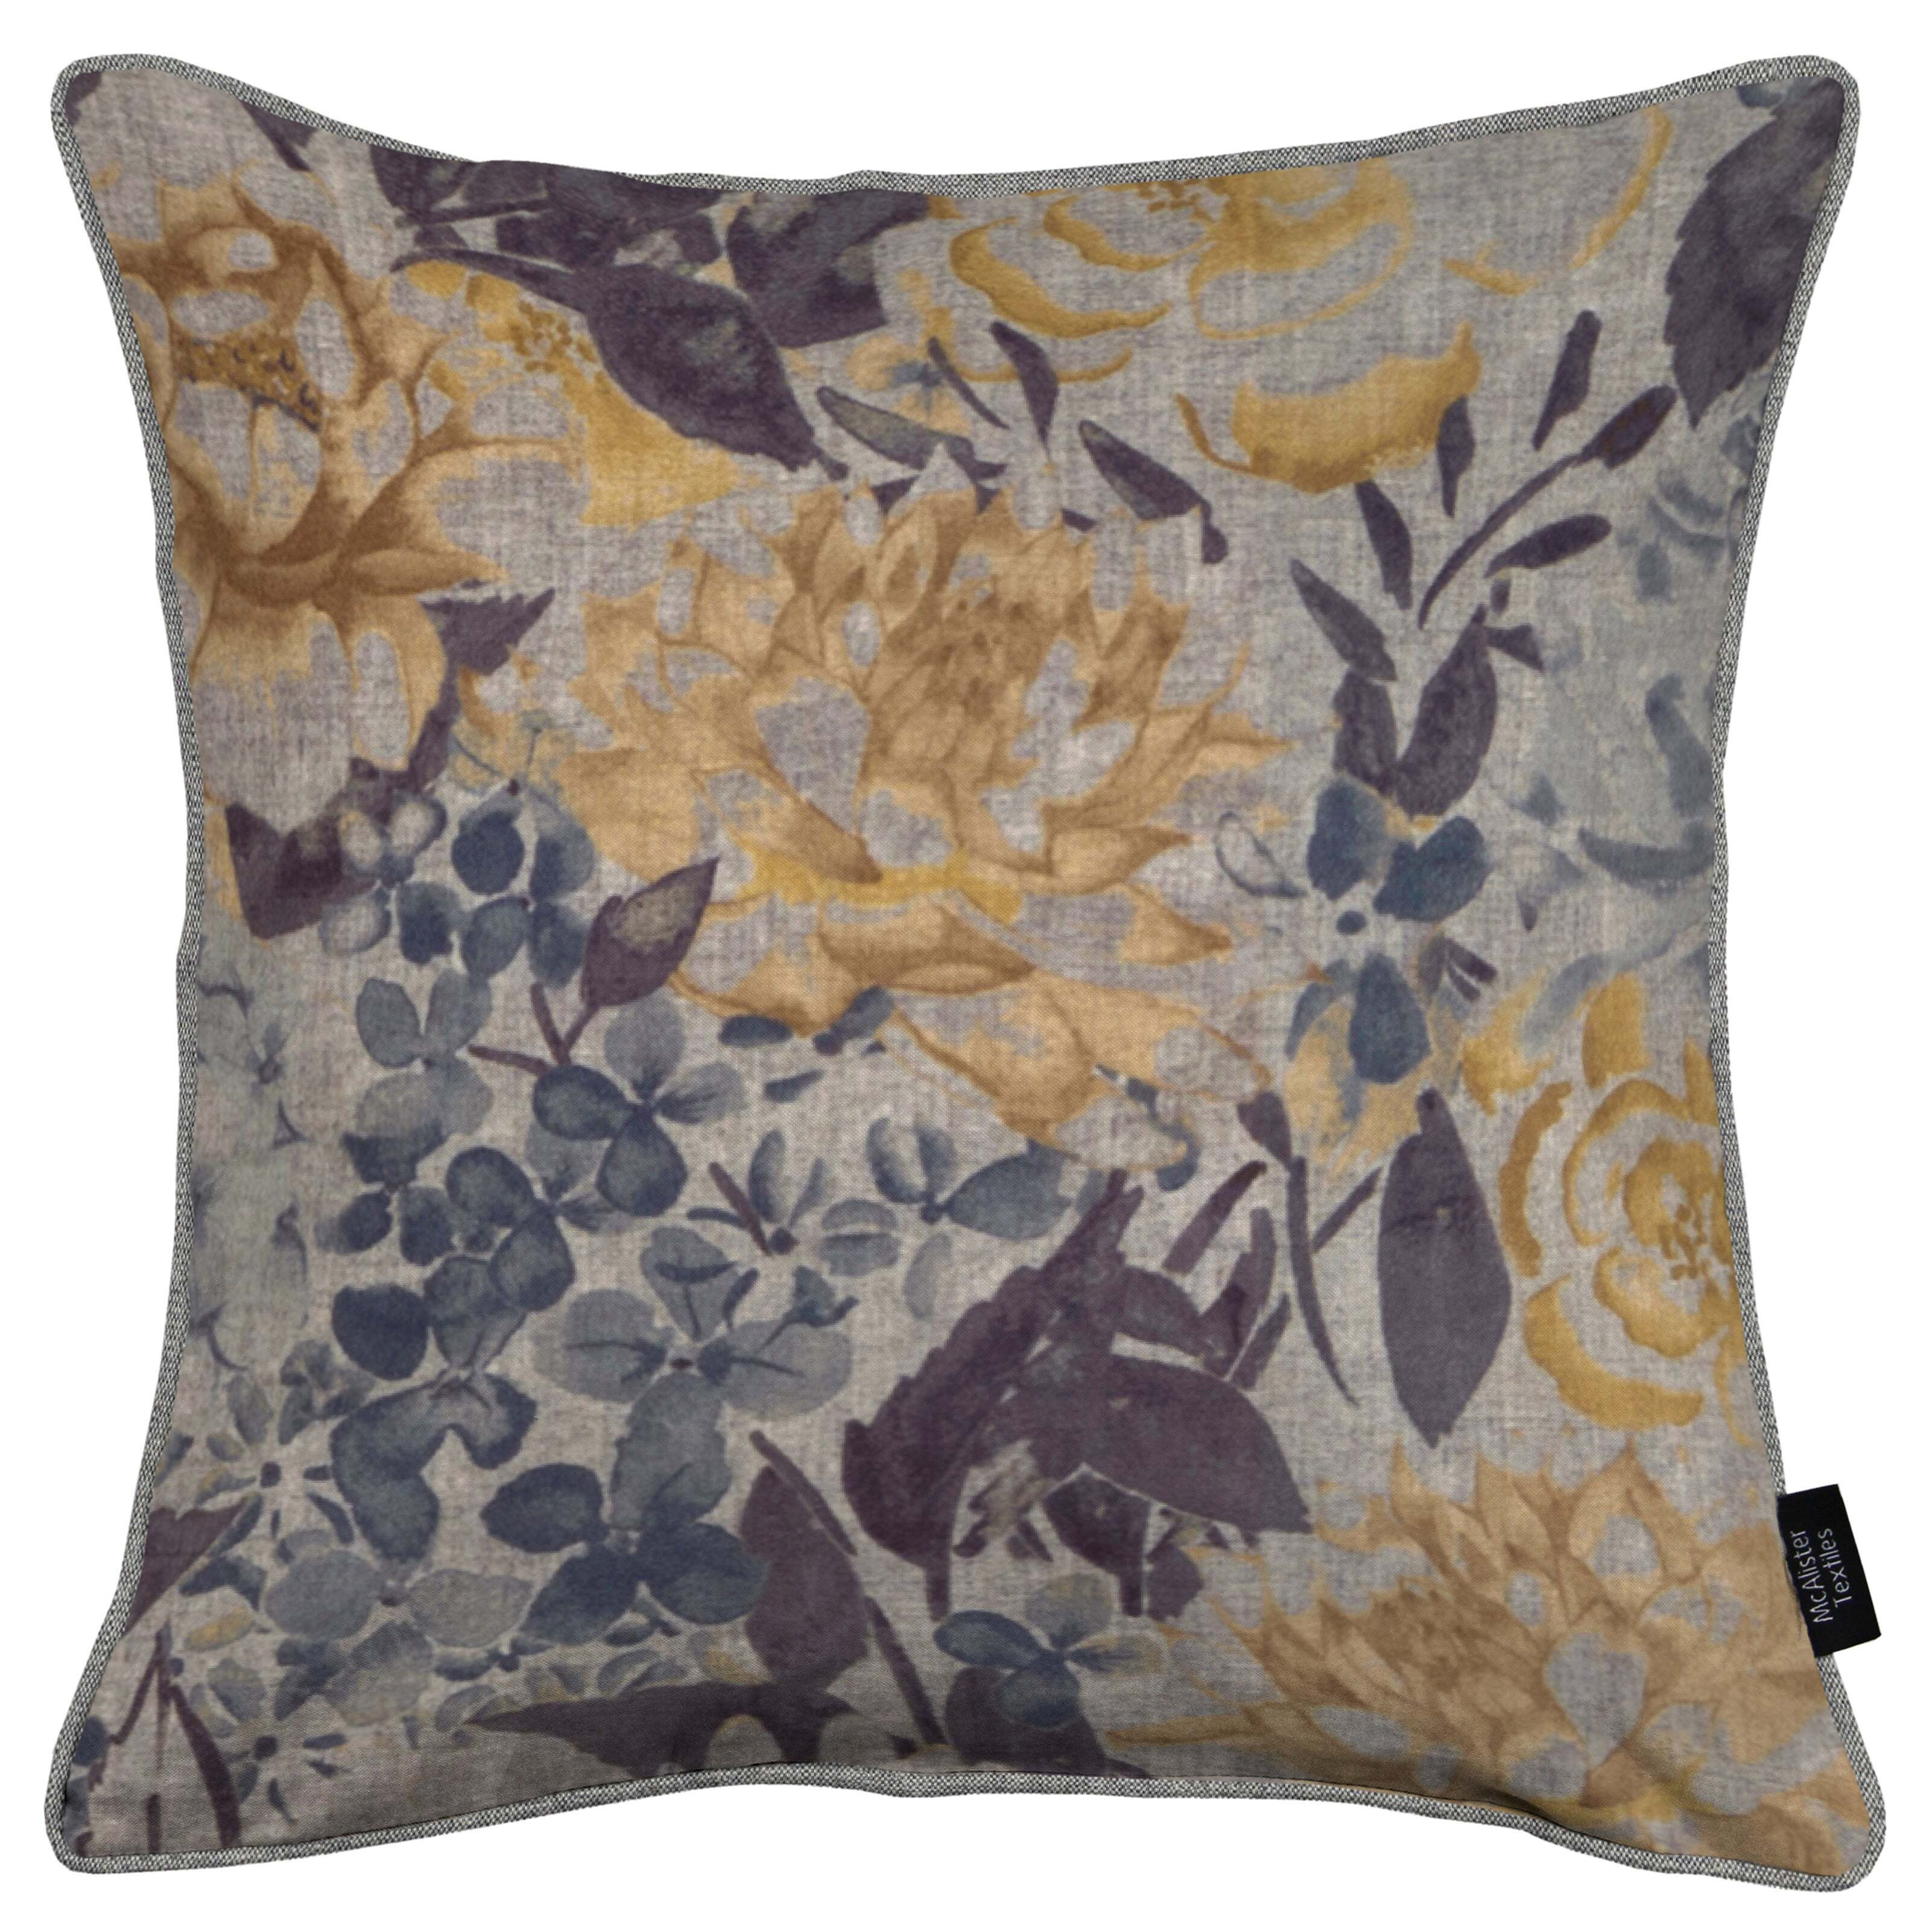 Blooma Blue, Grey and Ochre Floral Cushion, Polyester Filler / 50cm x 30cm